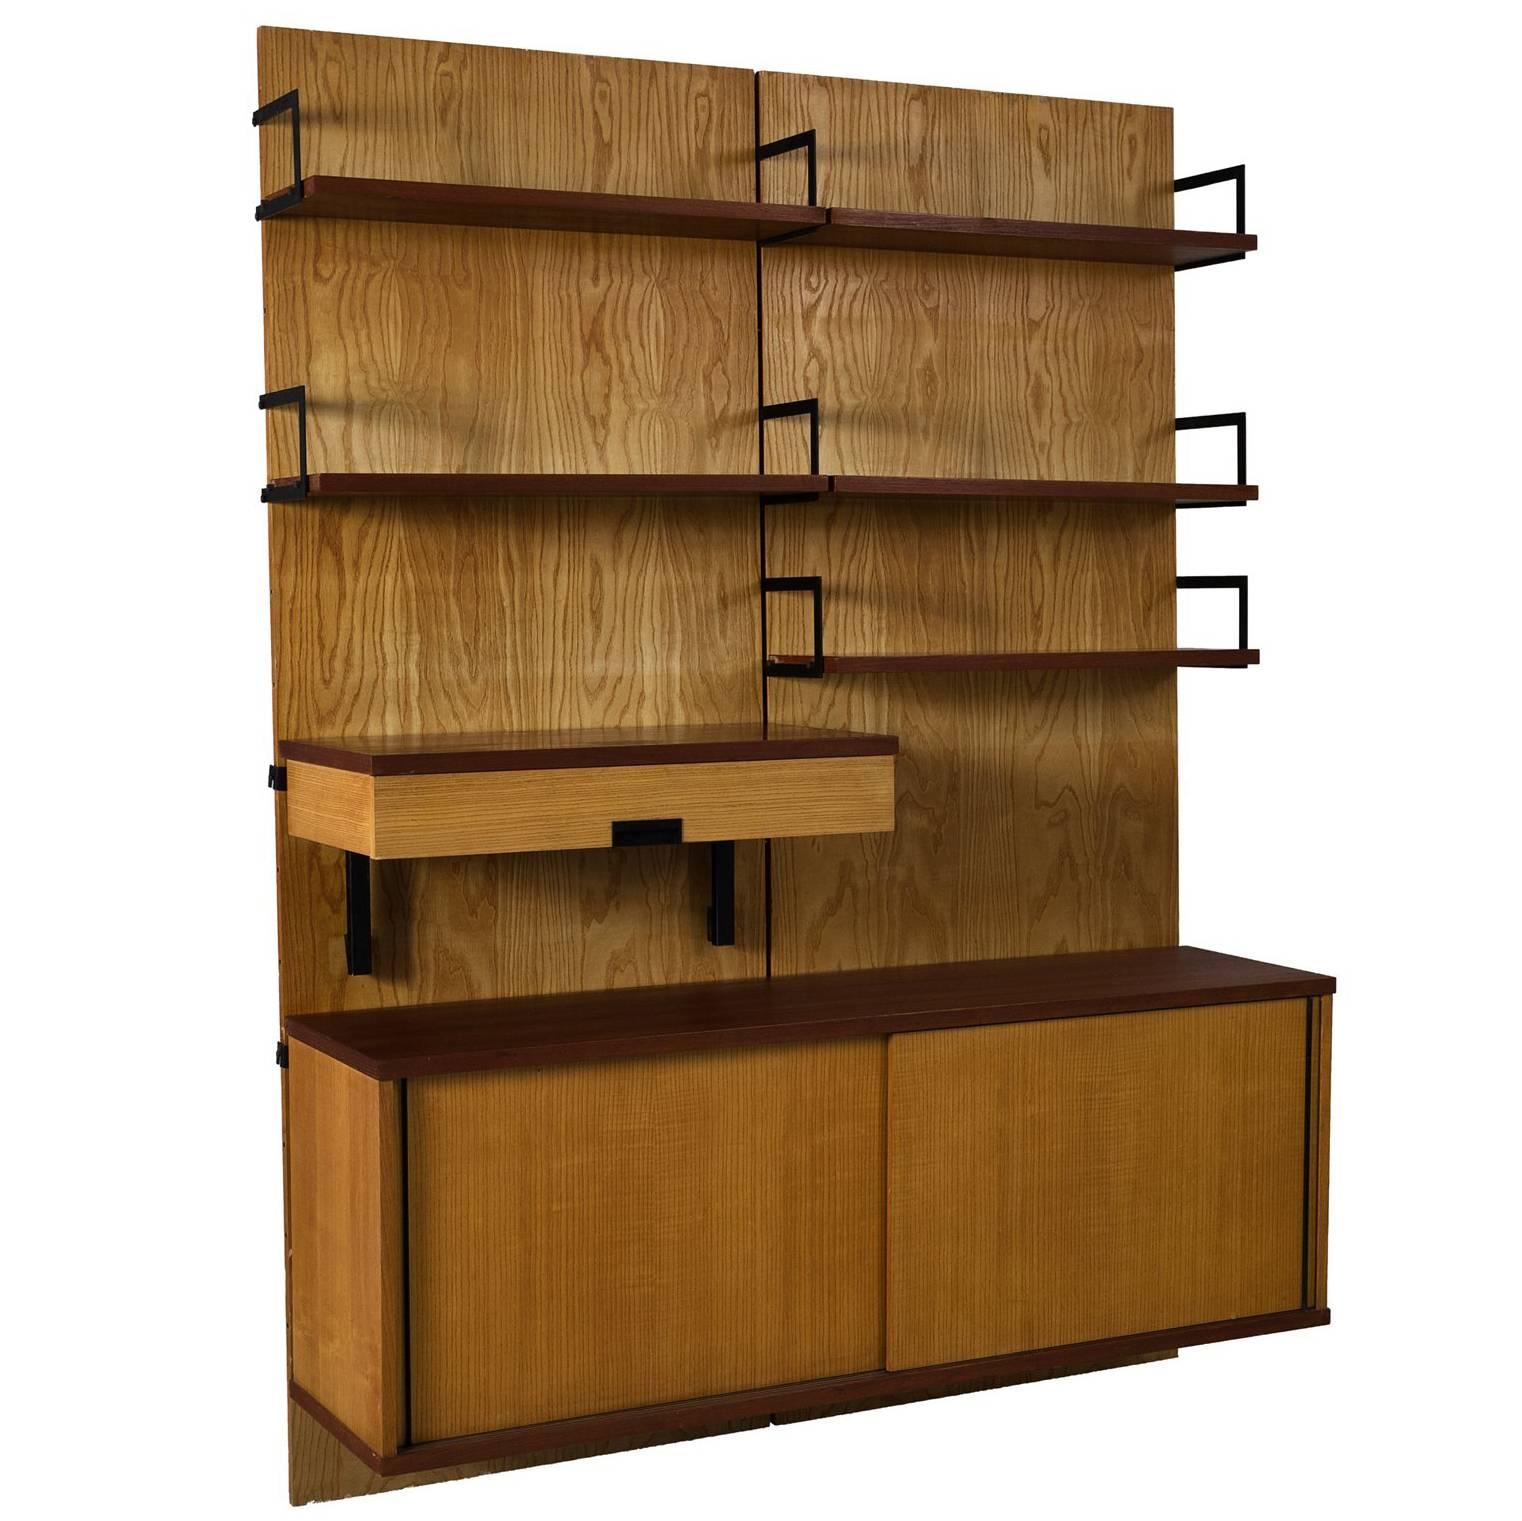 Cees Braakman Modular Wall Unit for UMS Pastoe